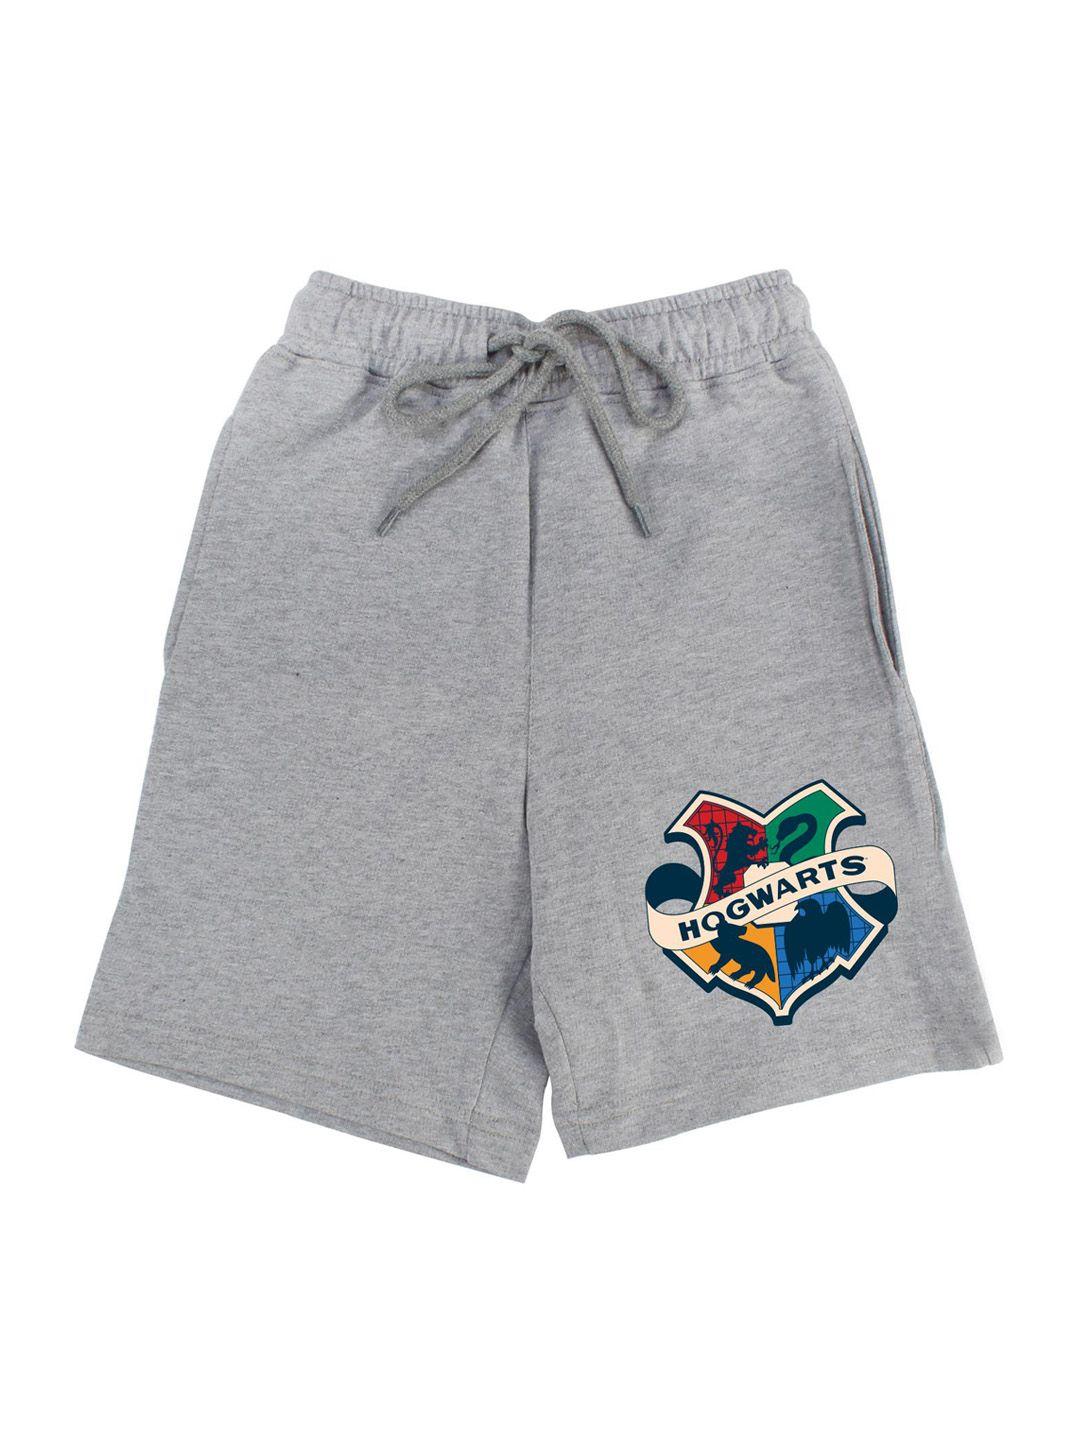 harry potter by wear your mind boys grey printed harry potter shorts